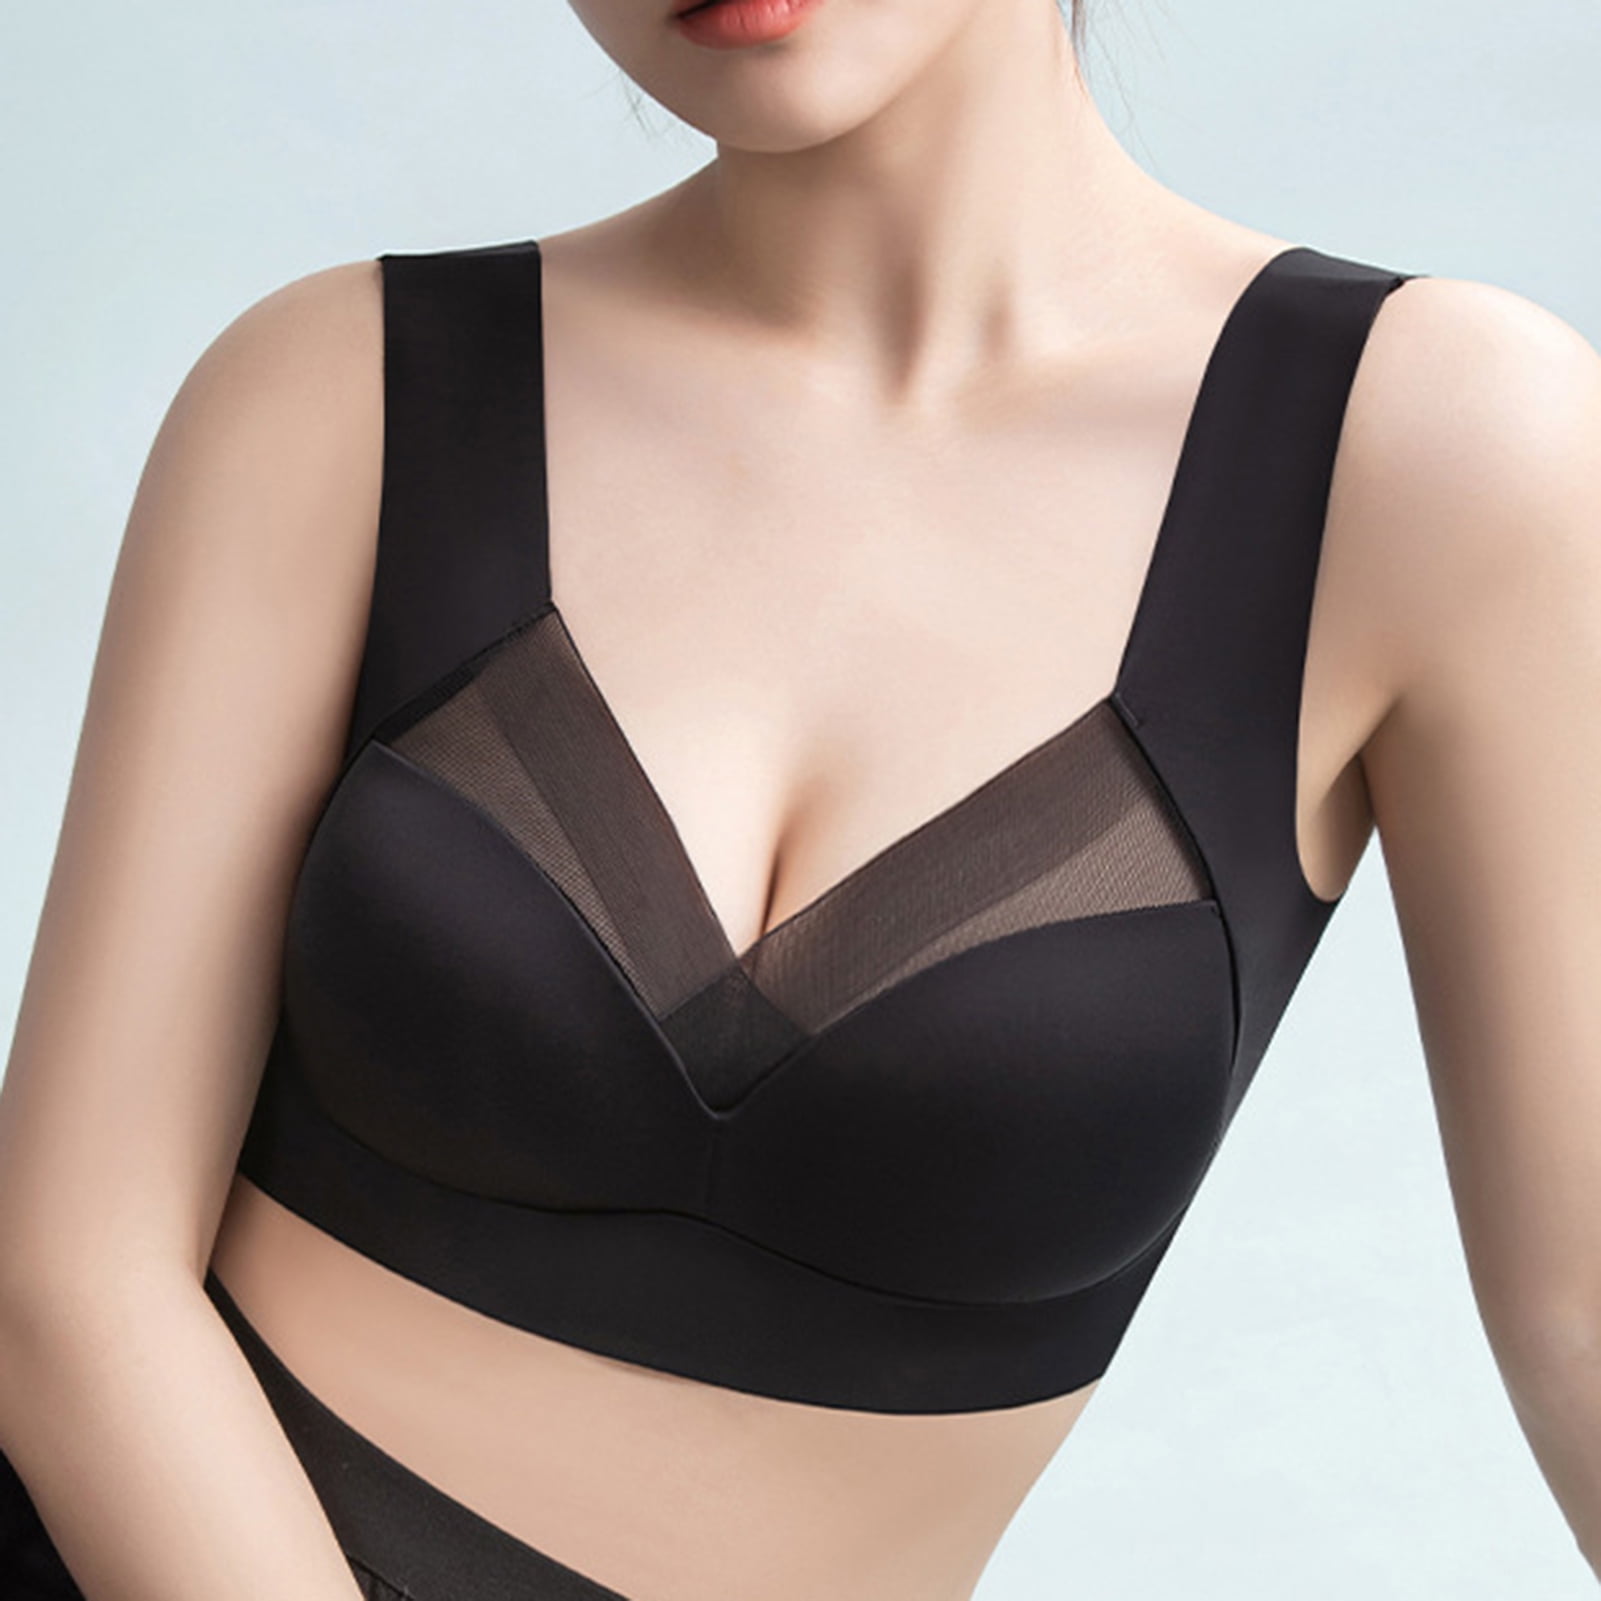 harmtty Lady Bra Padded Sexy Soft Intimate Solid Color Support Breast  Seamless Wire Free V Neck Sports Bra for Daily Wear,Skin Color 